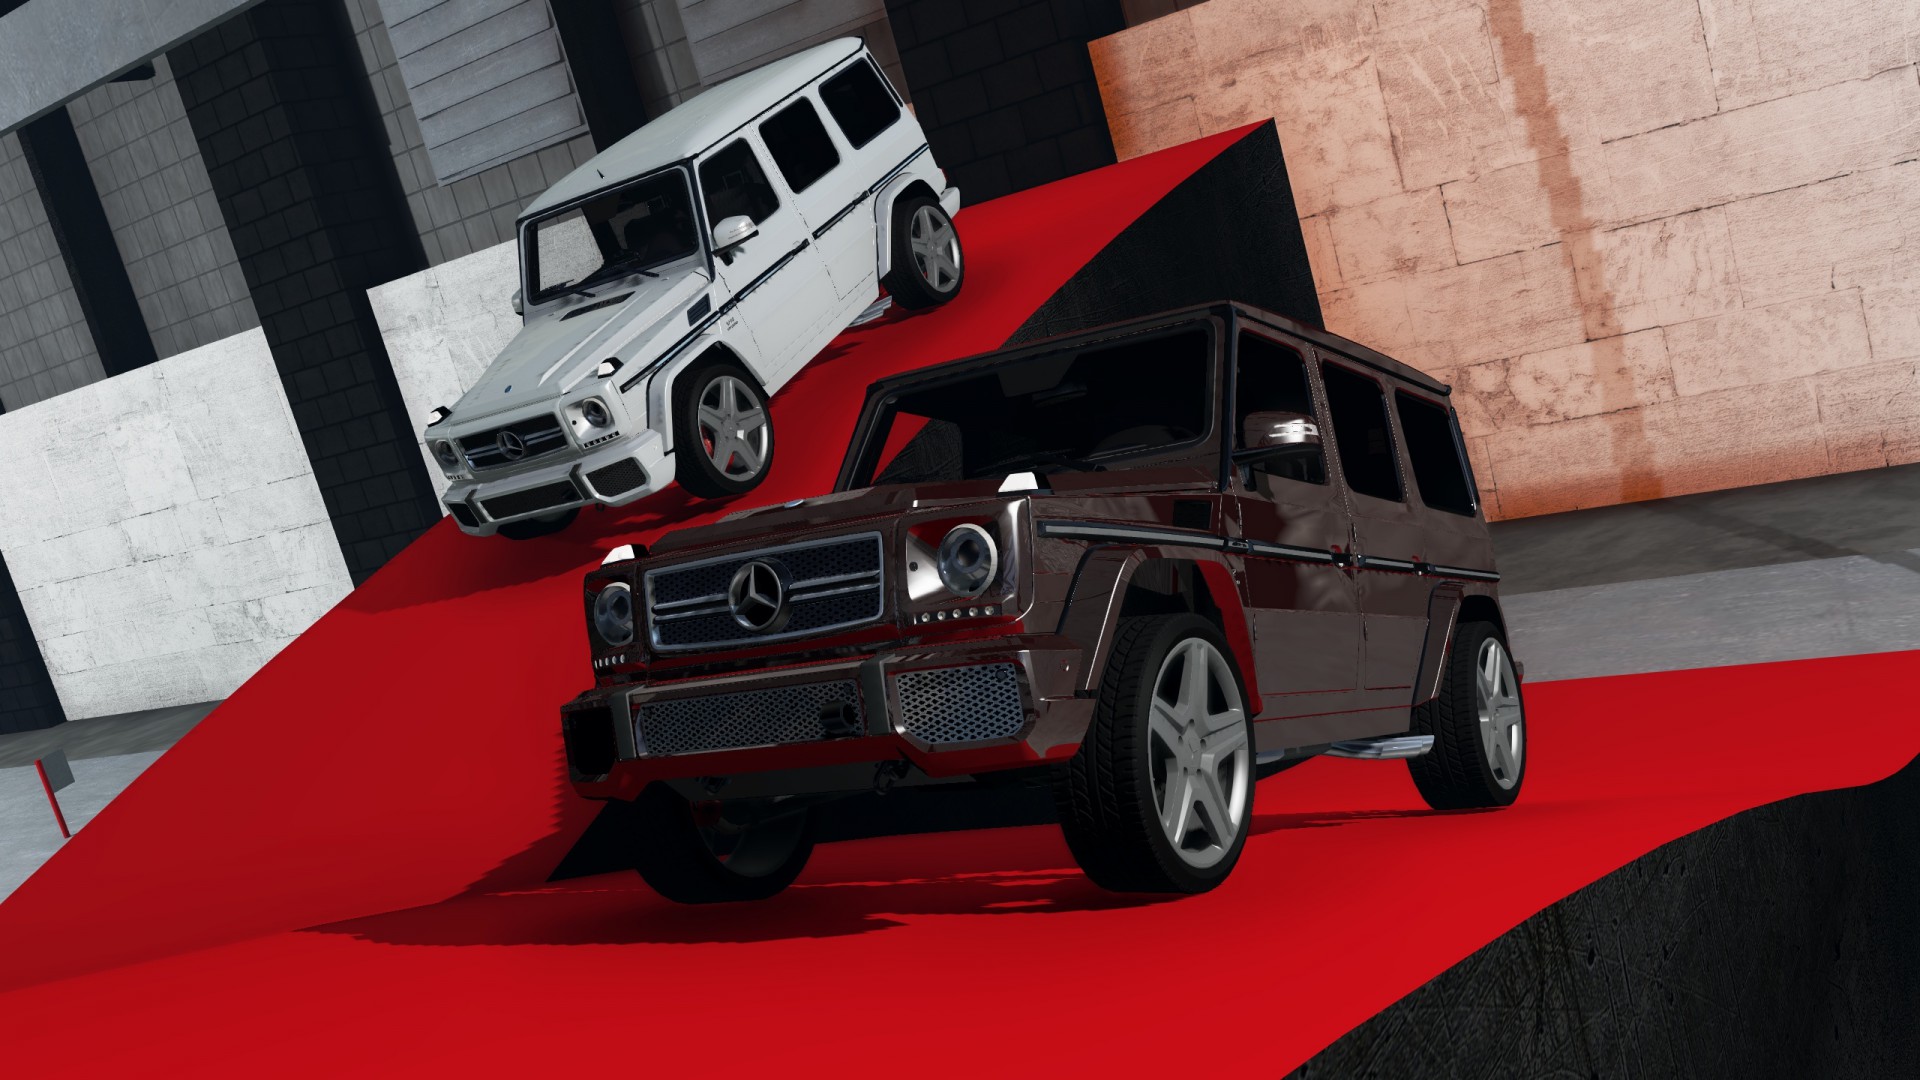 BEAMNG Drive Mercedes-Benz g65 AMG. Mercedes g63 BEAMNG. BEAMNG Drive Mercedes g. Mercedes-Benz g-class Pack 1 BEAMNG Drive.